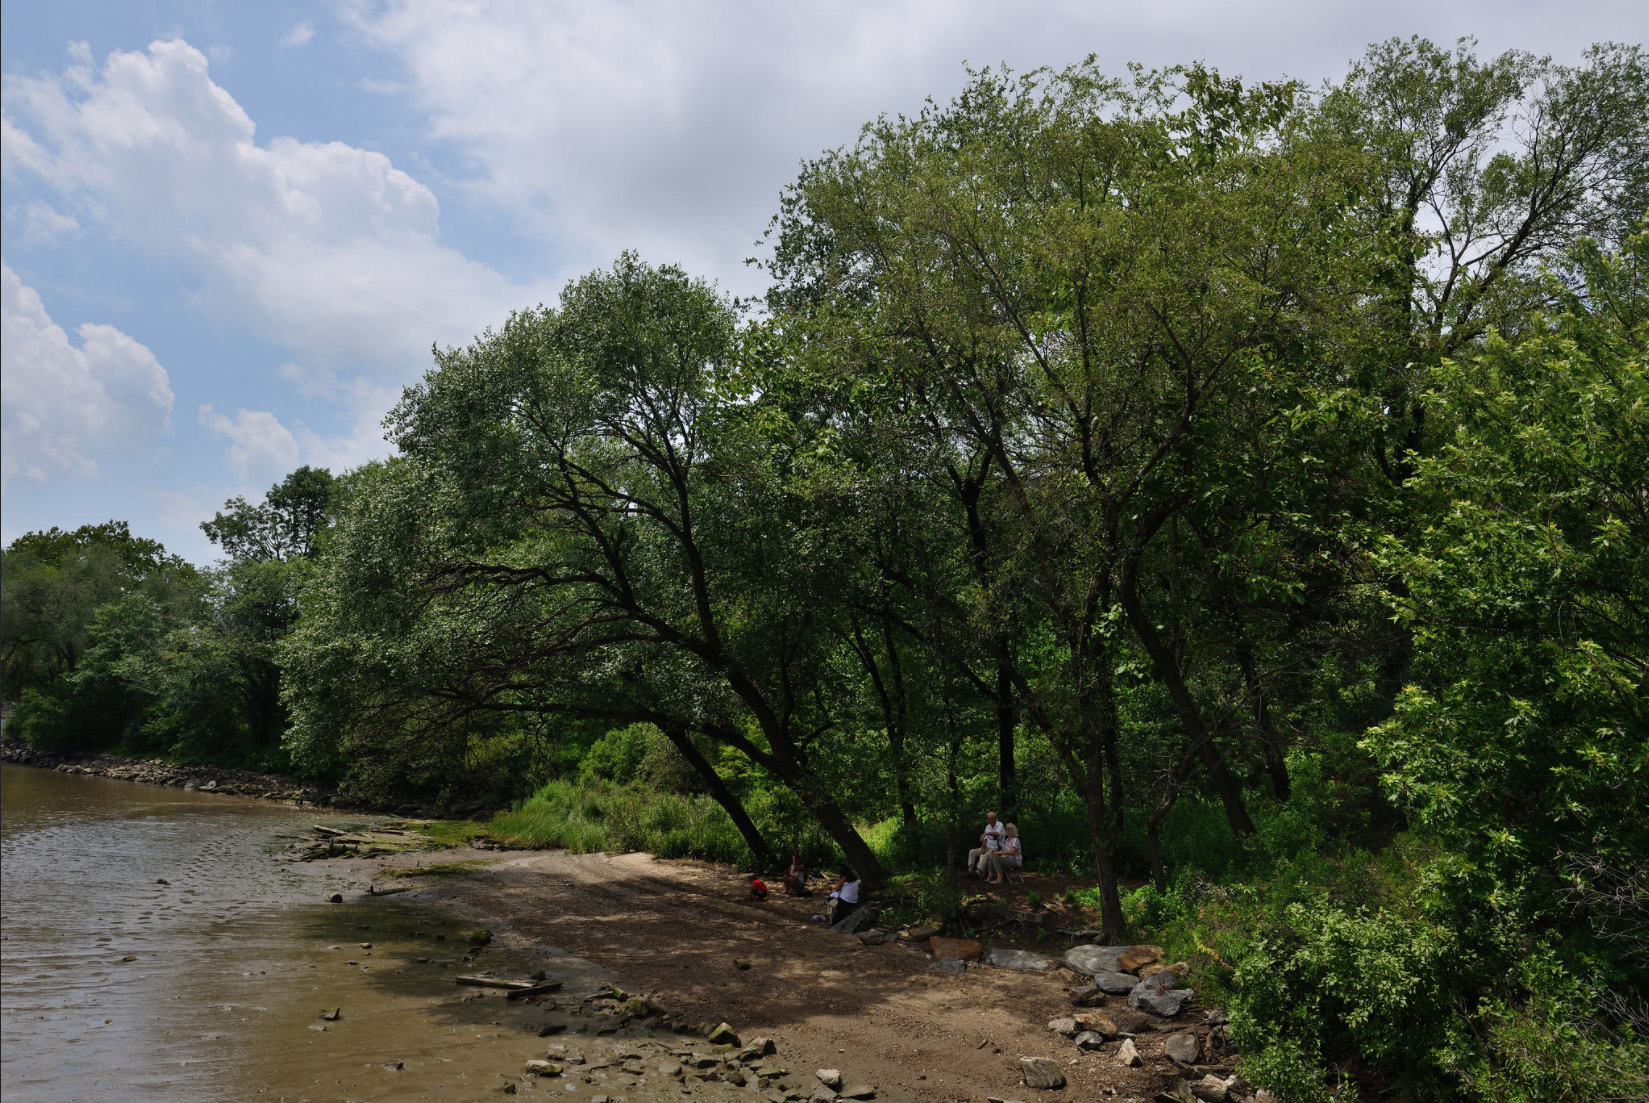 Swindler Cove Park’s small beach is visited by birds and humans alike. Photo: <a href=\"https://www.flickr.com/photos/edcnyc/\" target=\"_blank\">Eddie Crimmins</a>